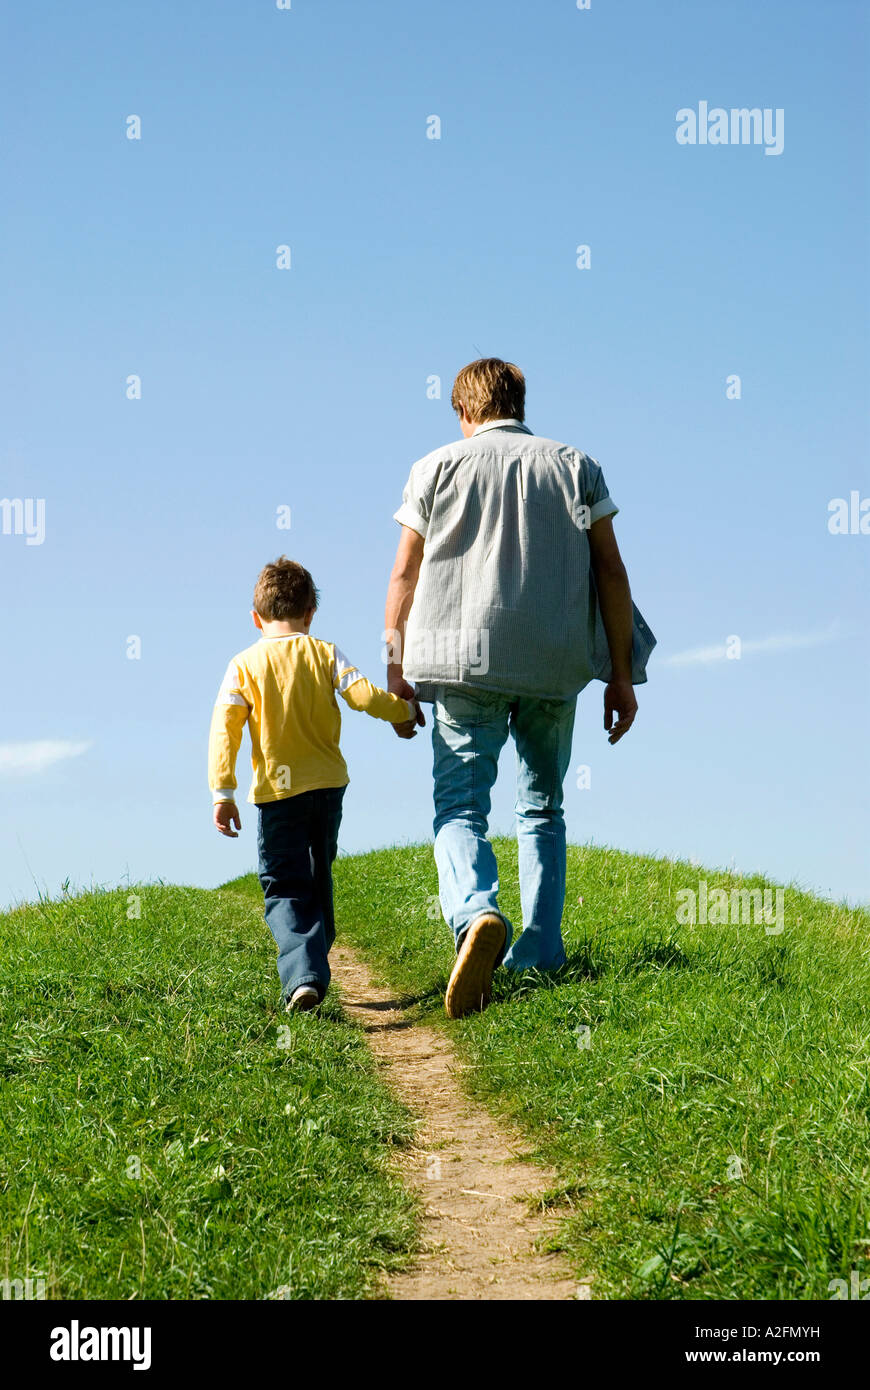 Father walking hand in hand with son, rear view Stock Photo